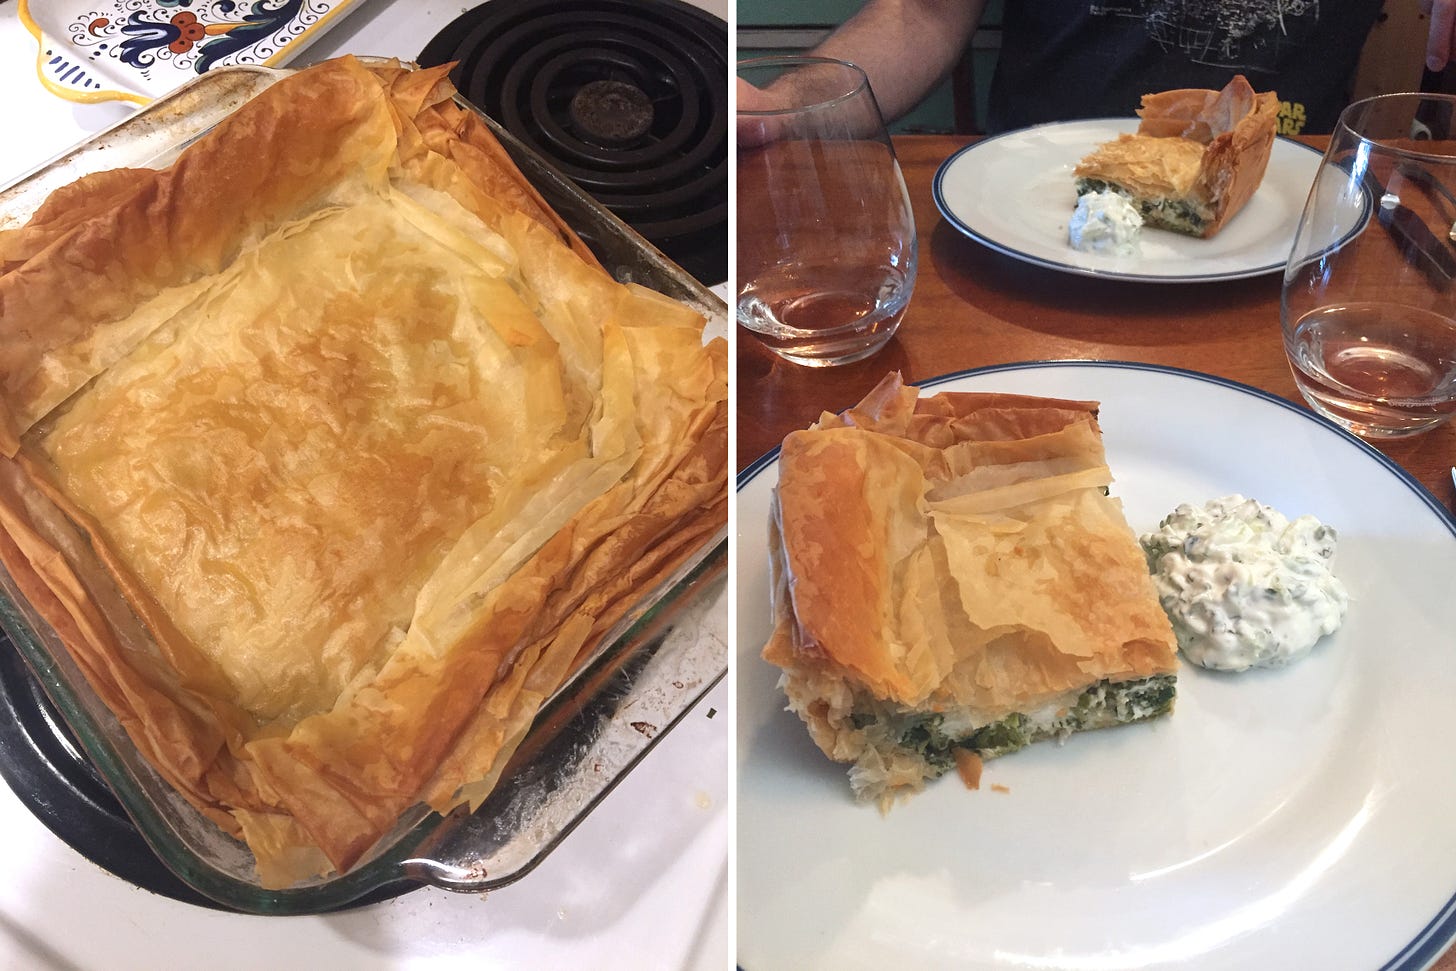 left image: the completed spanakopita in the square baking dish, the top pastry now golden brown. right image: two plates, each with a slice of the spanakopita and a dollop of tzatziki to the side. stemless glasses of rosé wine sit at the corner of each plate.